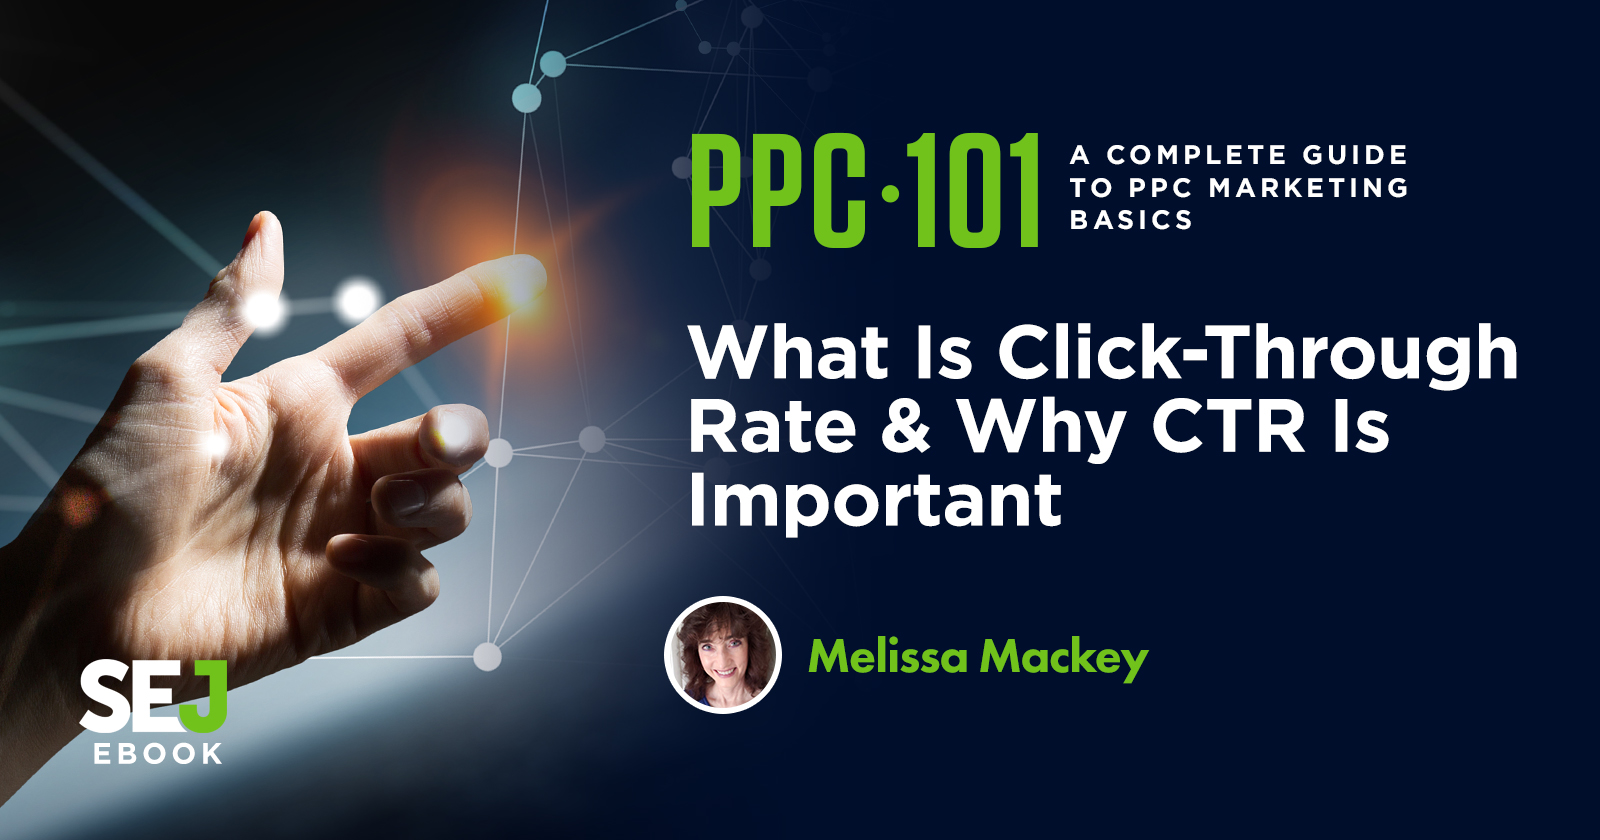 What is Click-Through Rate and Why Is CTR Important